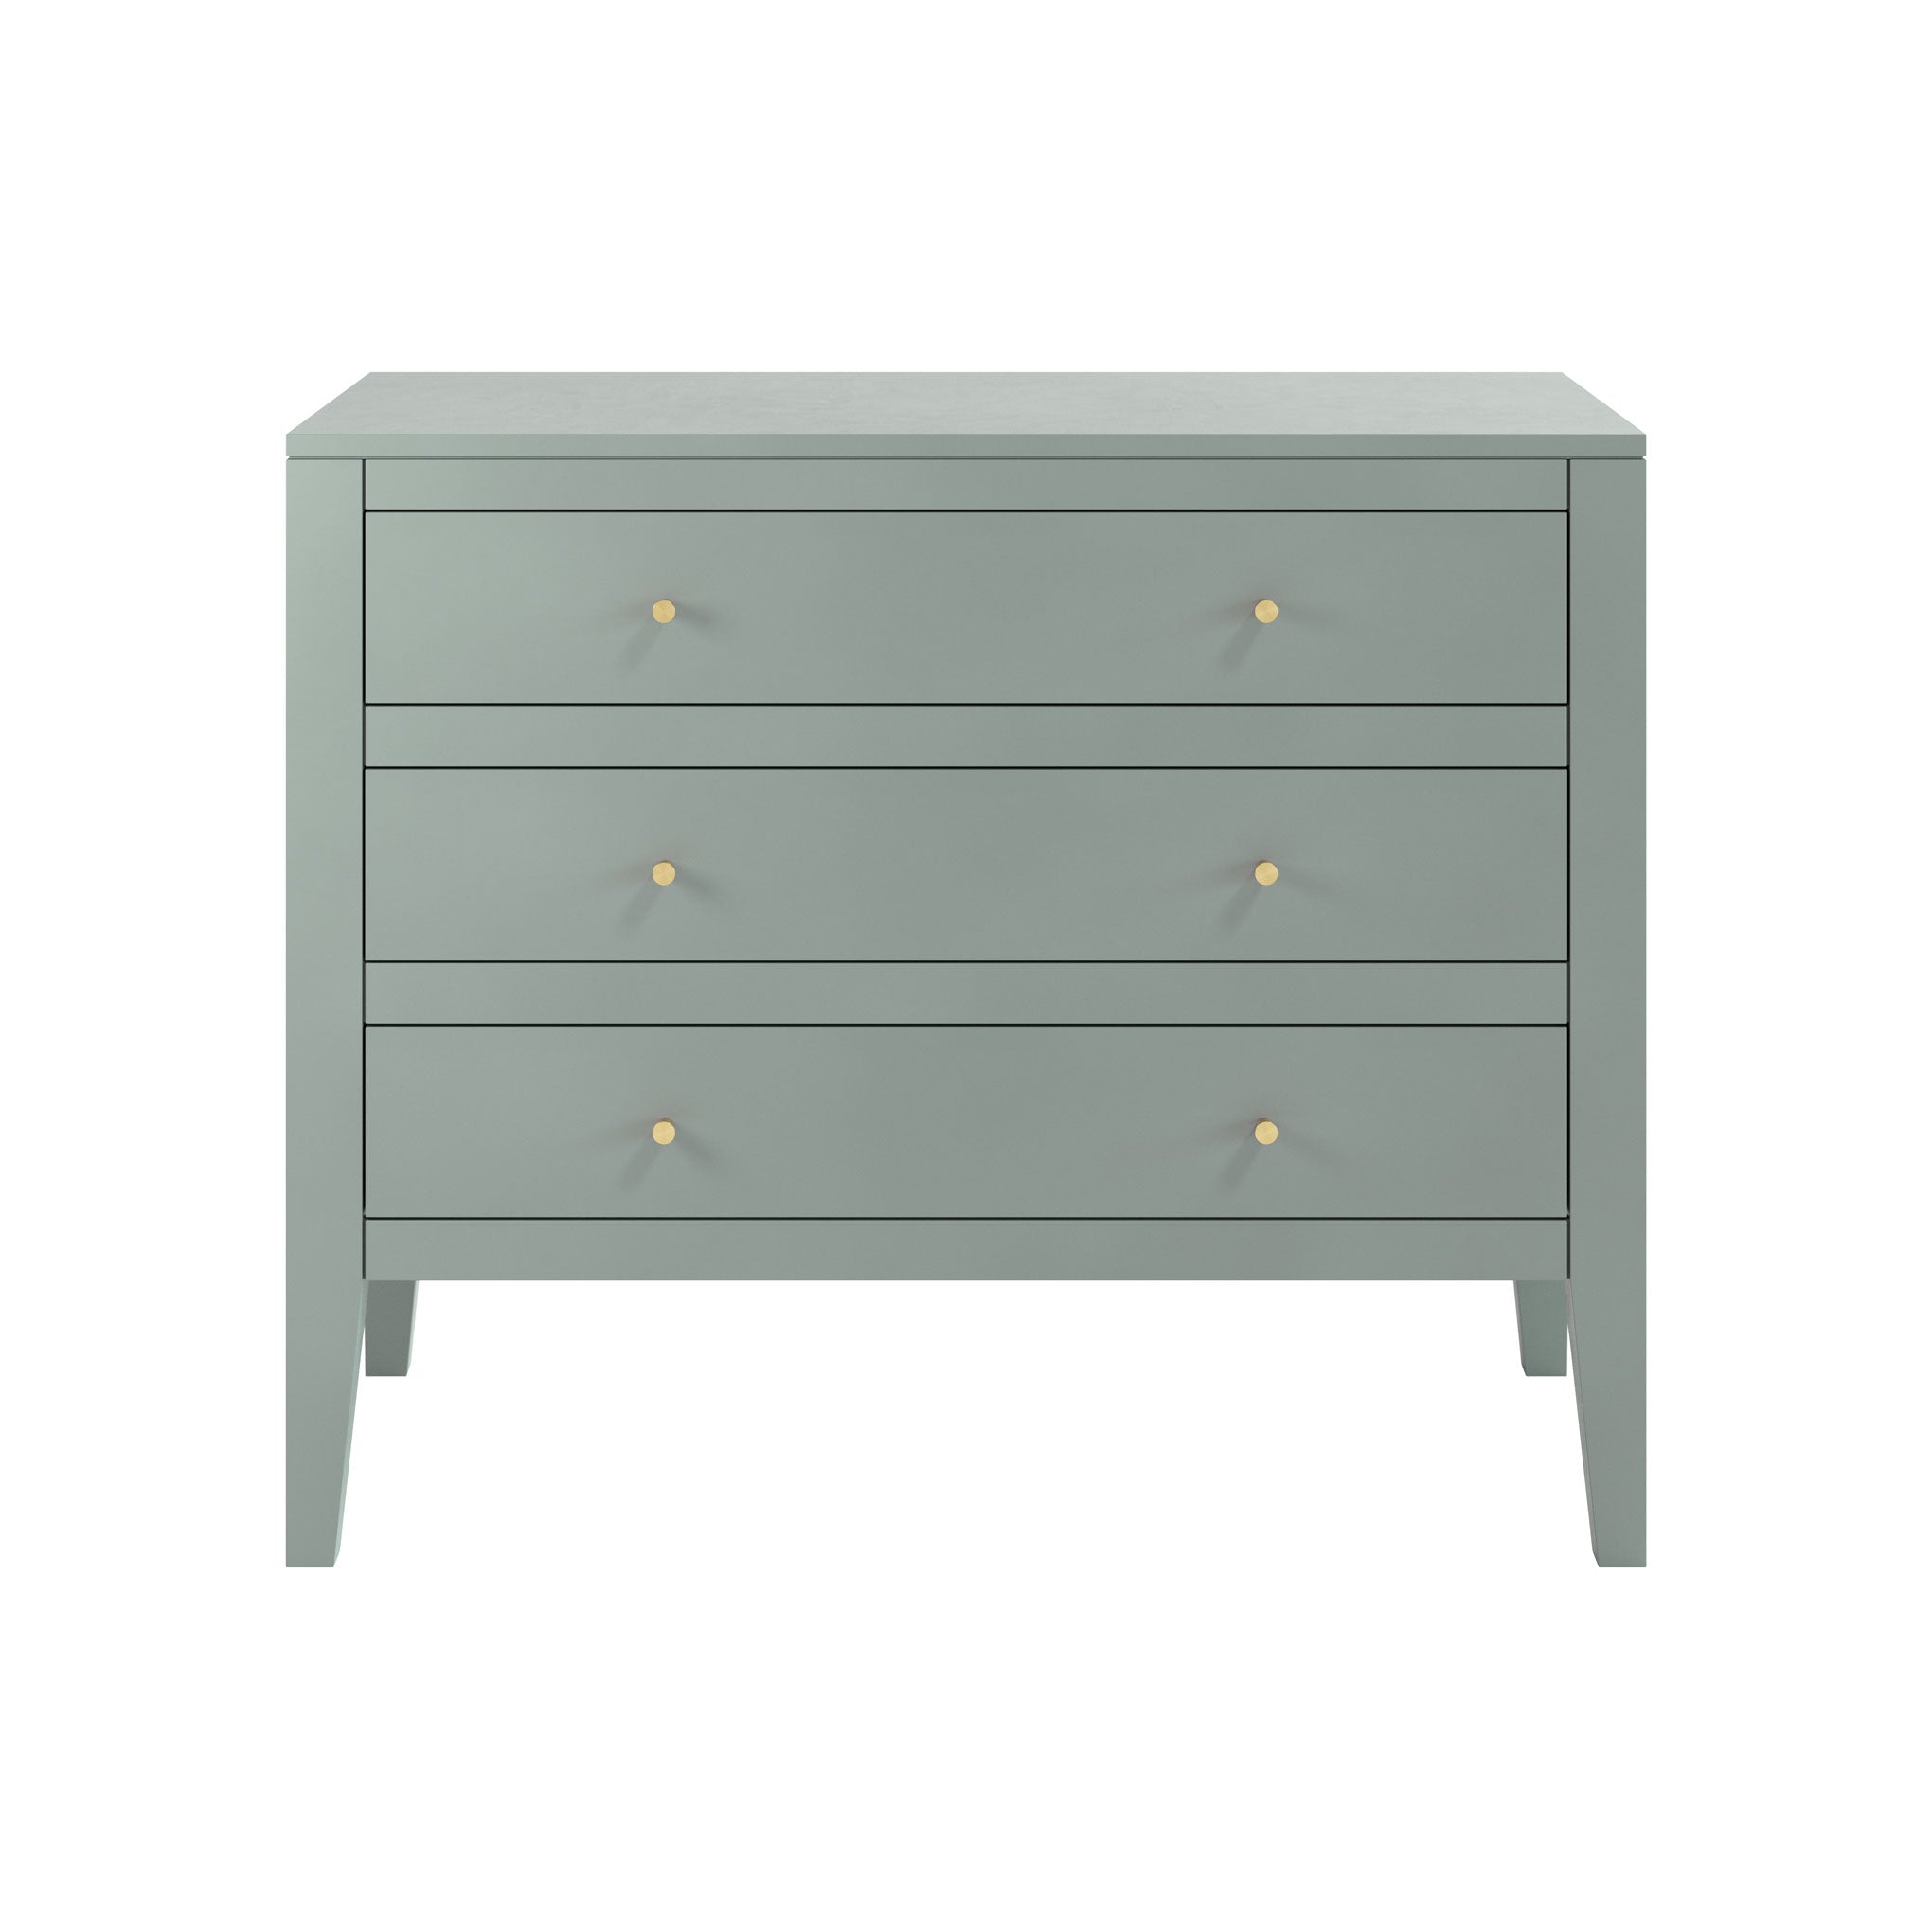 Alton Chest of Drawers Pigeon Grey